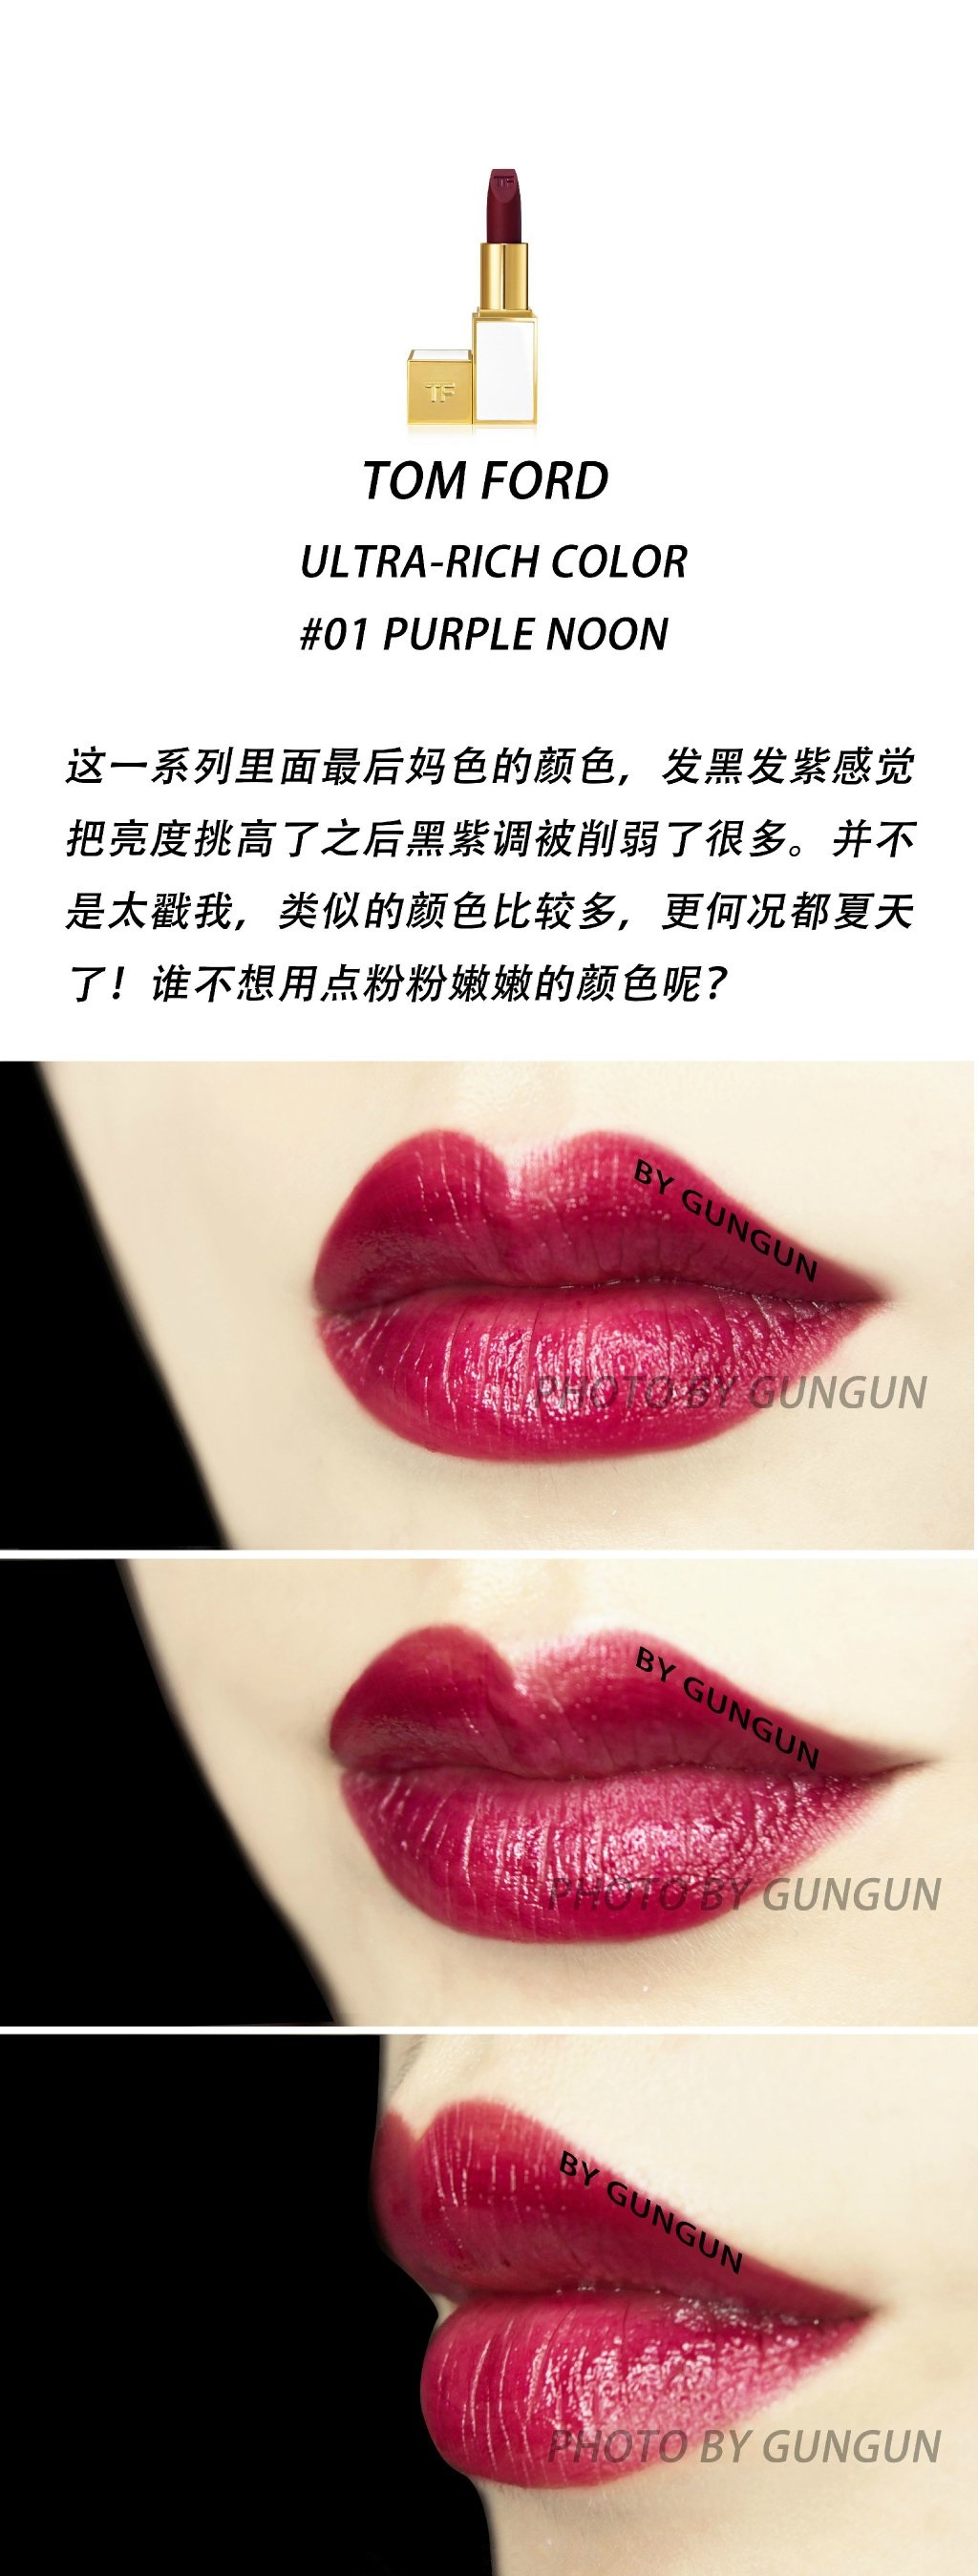 TOM FORD Ultra—Rich Lip Color 2016年白管唇膏 色号：01/02/03/04/05试色